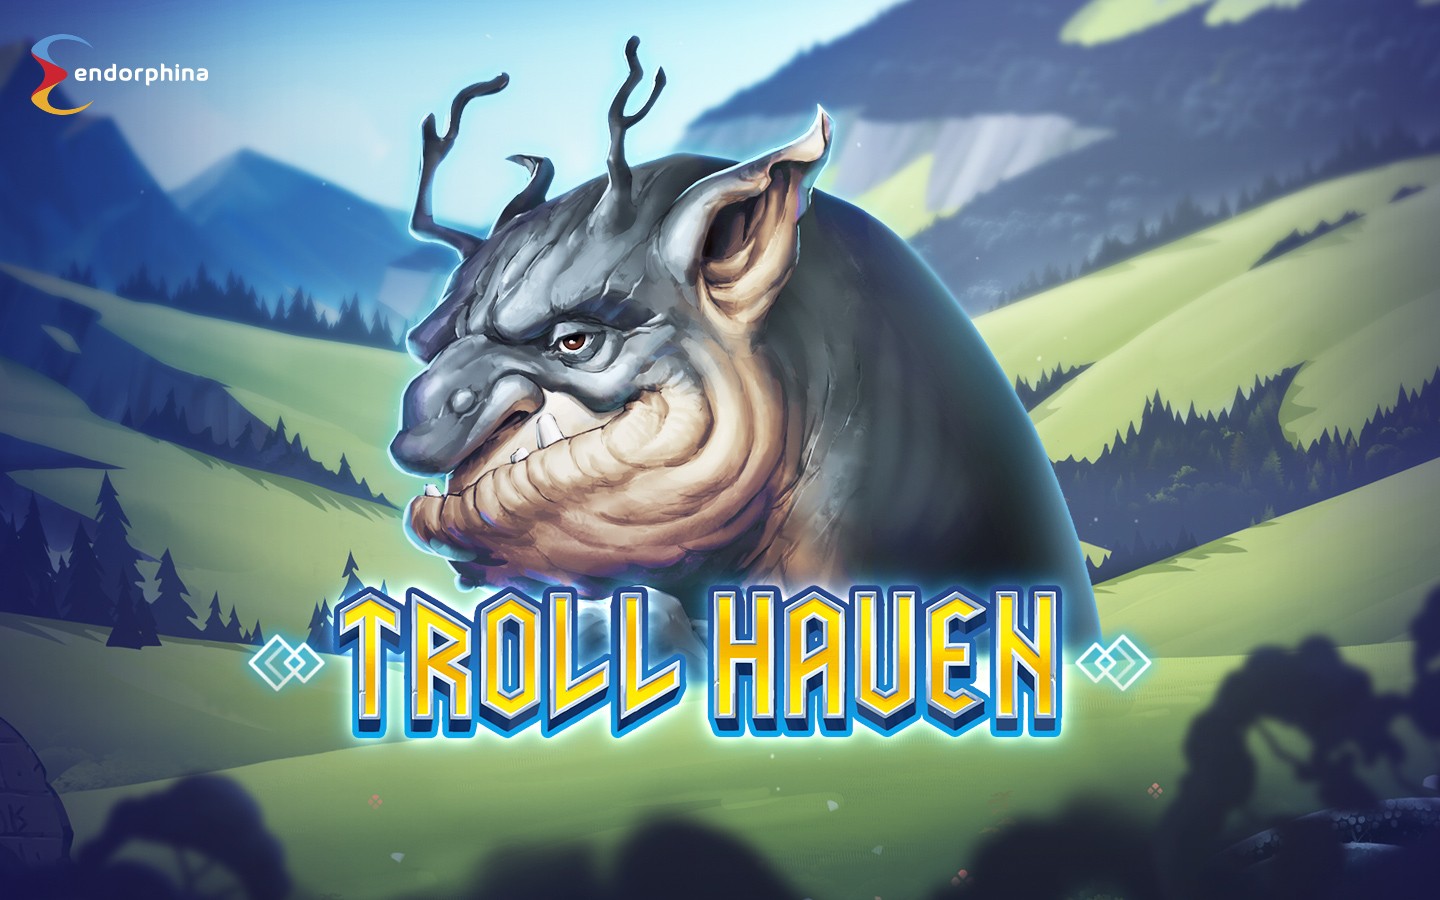 BEST NORDIC SLOTS OF 2021 | Try Troll Haven slot now!